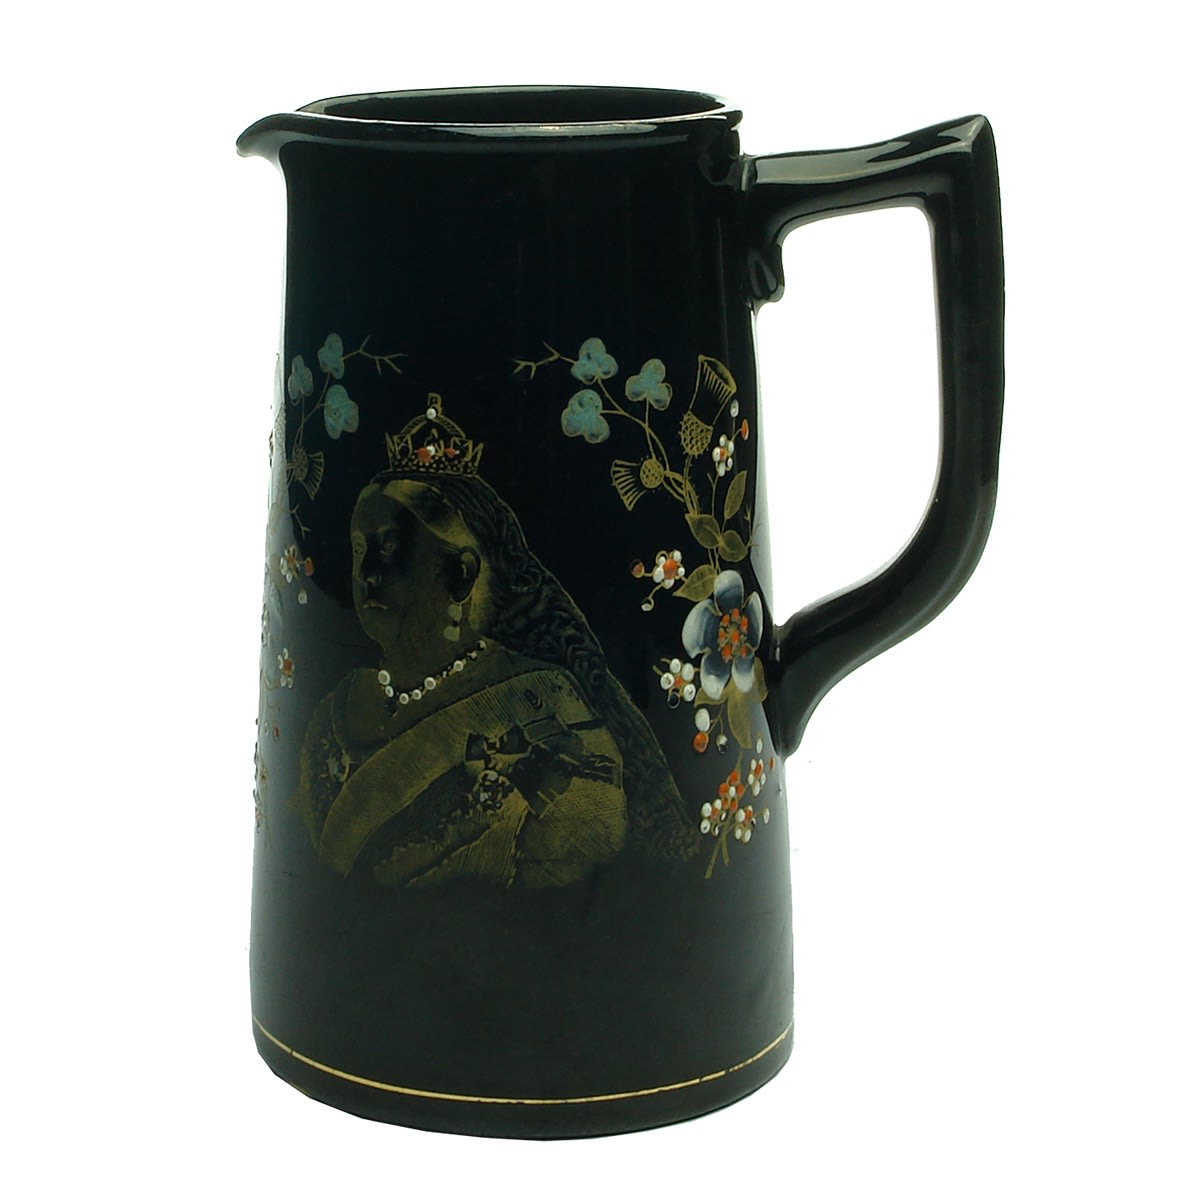 Royalty China Jug. Queen Victoria's 60th Year. Black with Gold and coloured overglaze decoration.